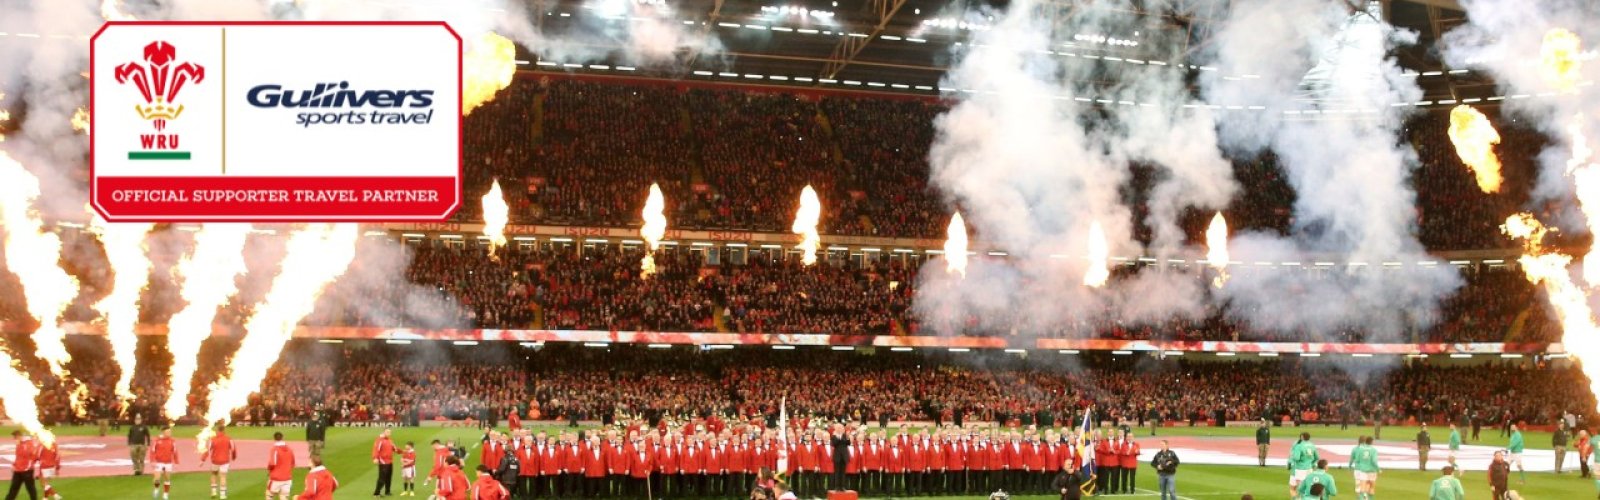 Official Wales v Ireland Six Nations ticket package